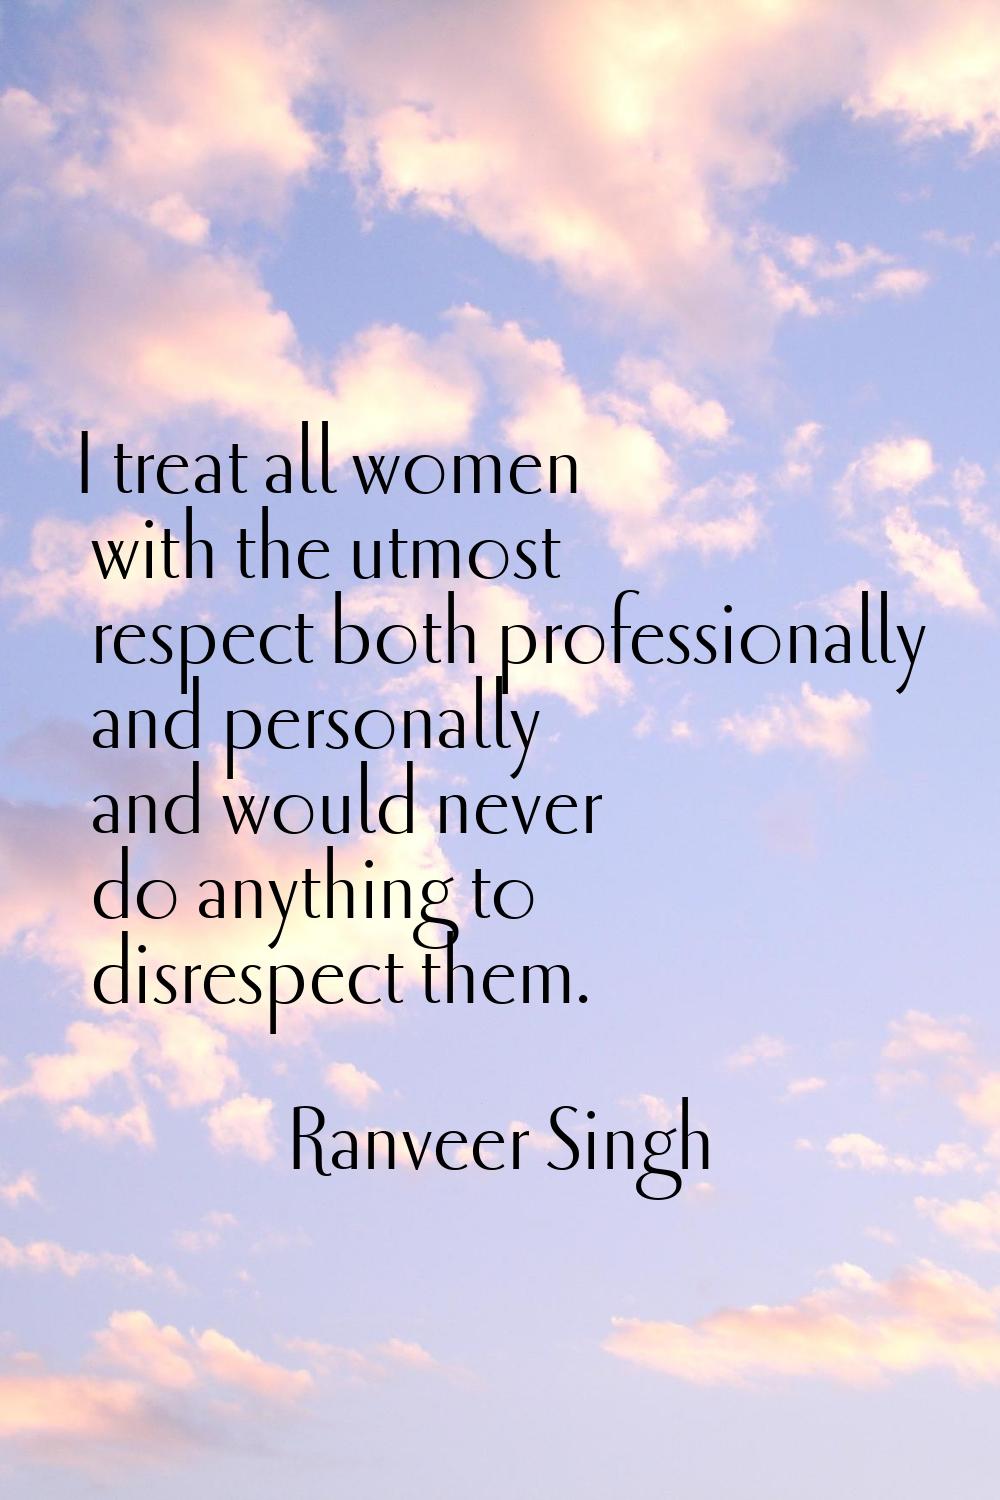 I treat all women with the utmost respect both professionally and personally and would never do any